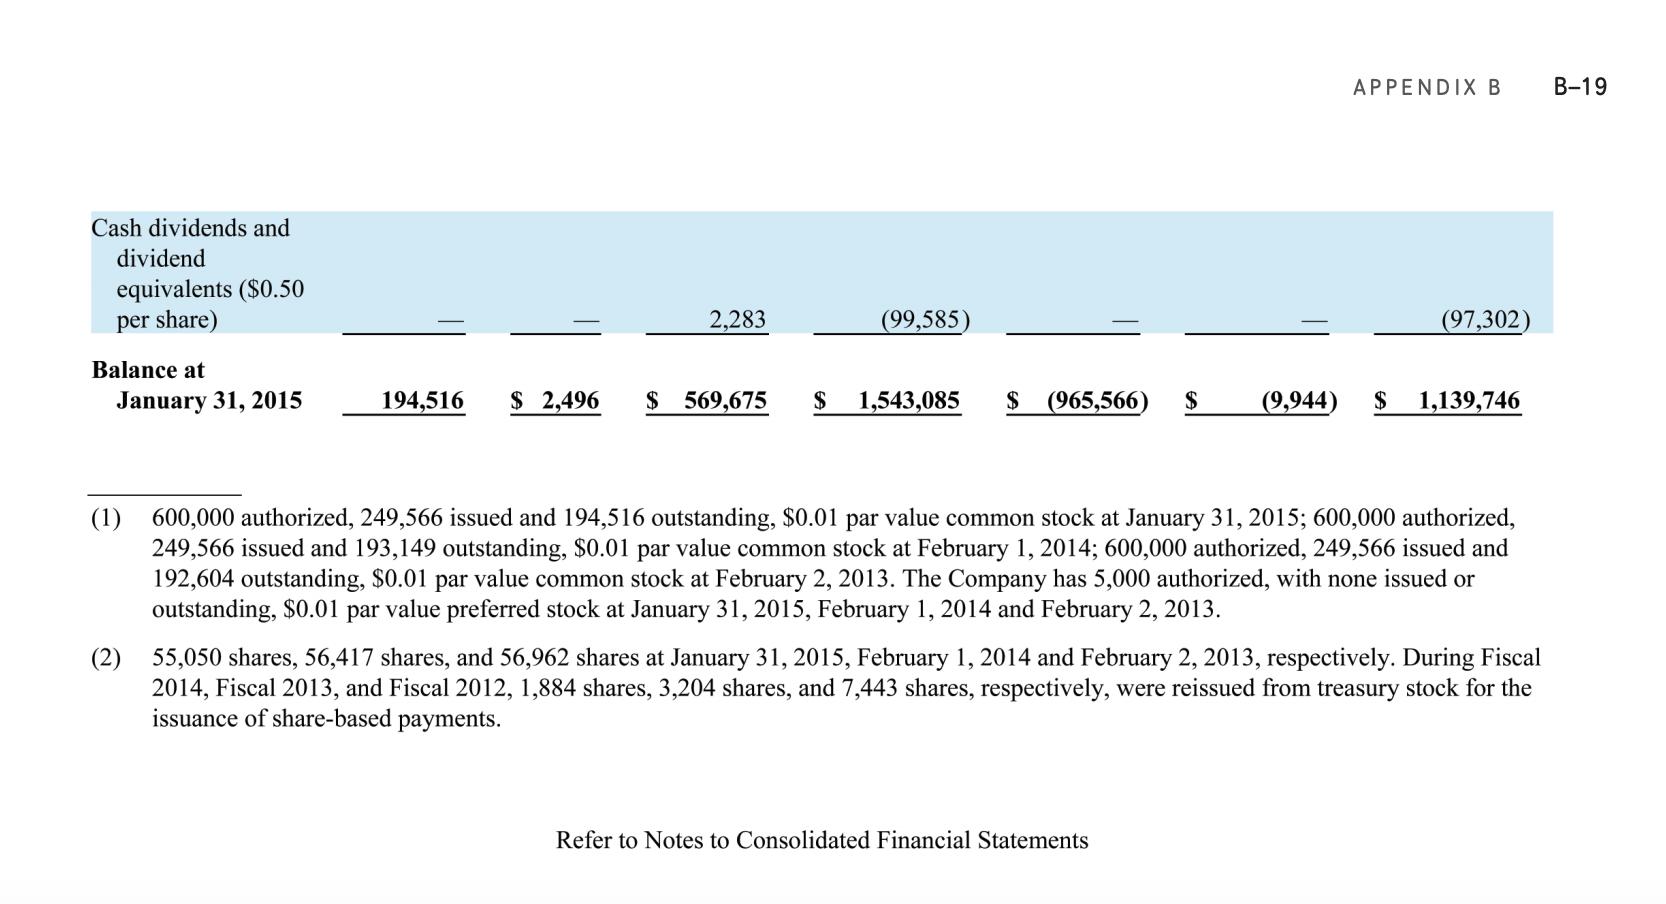 APPENDIX B B-19 Cash dividends and dividend equivalents ($0.50 per share) 2,283 (99,585) (97,302 Balance at January 31, 2015